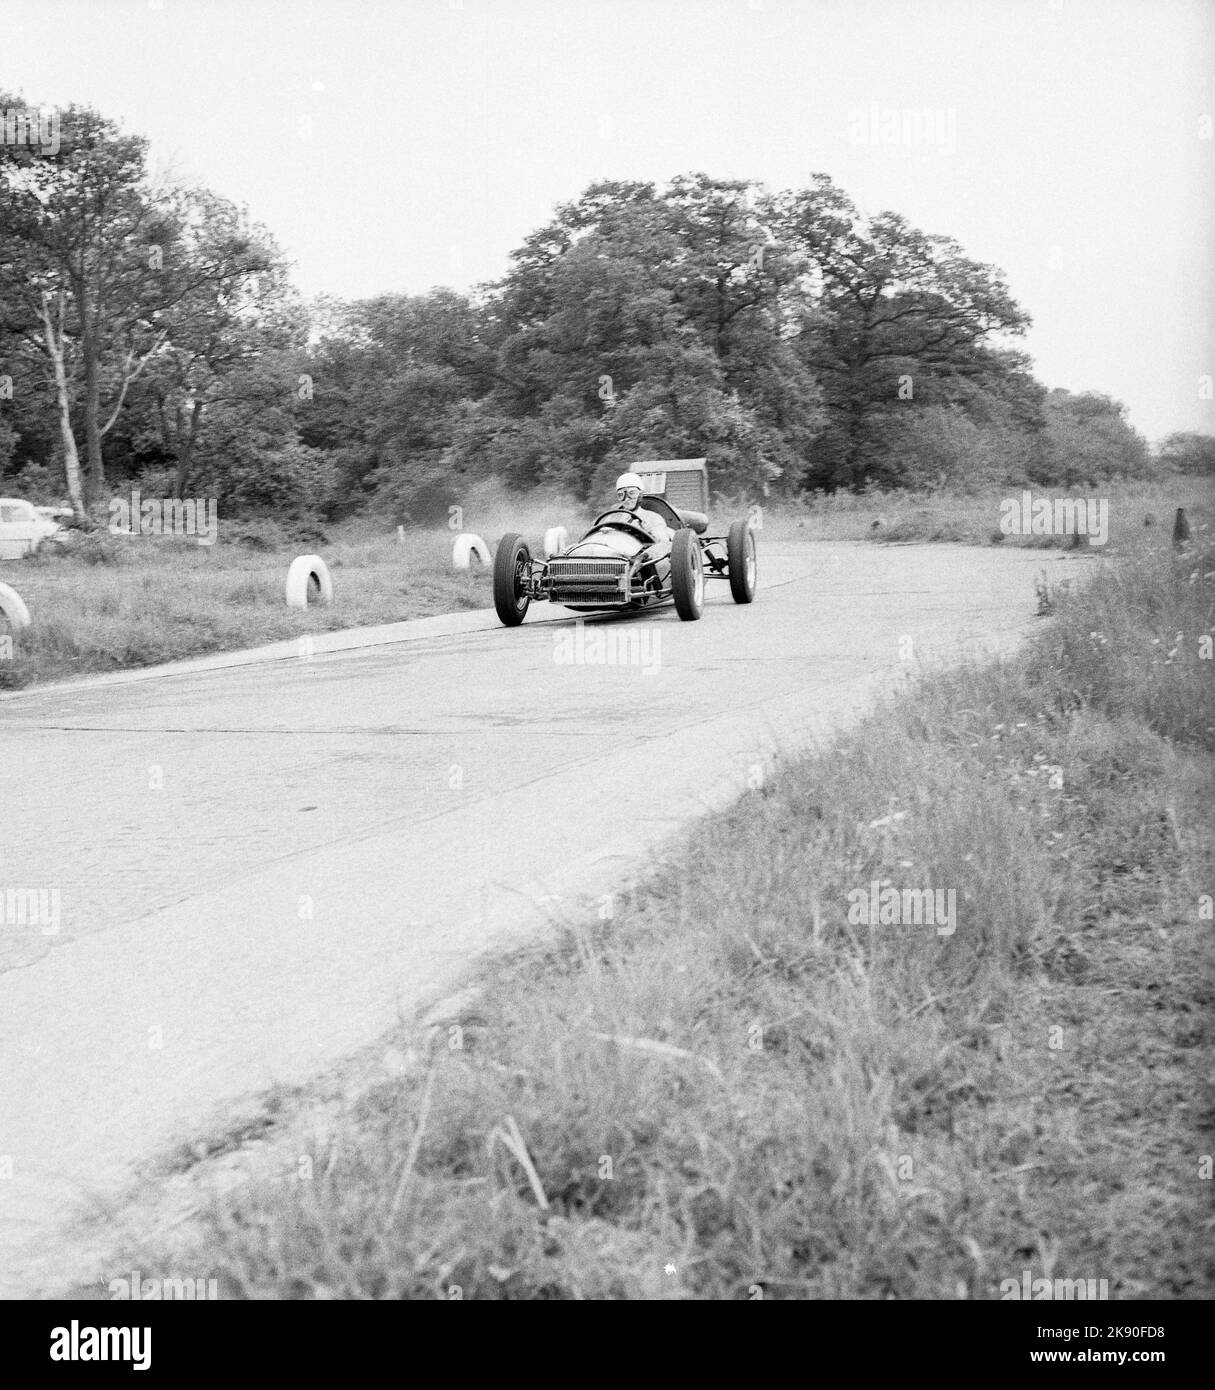 1962, historical, a single-seater racing car on the perimeter road circuit at the Finmere Aerodome, a disused RAF airfield near to Buckingham, England, UK, home to Geoff Clarke’s Motor Racing Stables. The racing school’s 1,000 cc single-seaters were rear-engined Formula Junior Coopers. Stock Photo